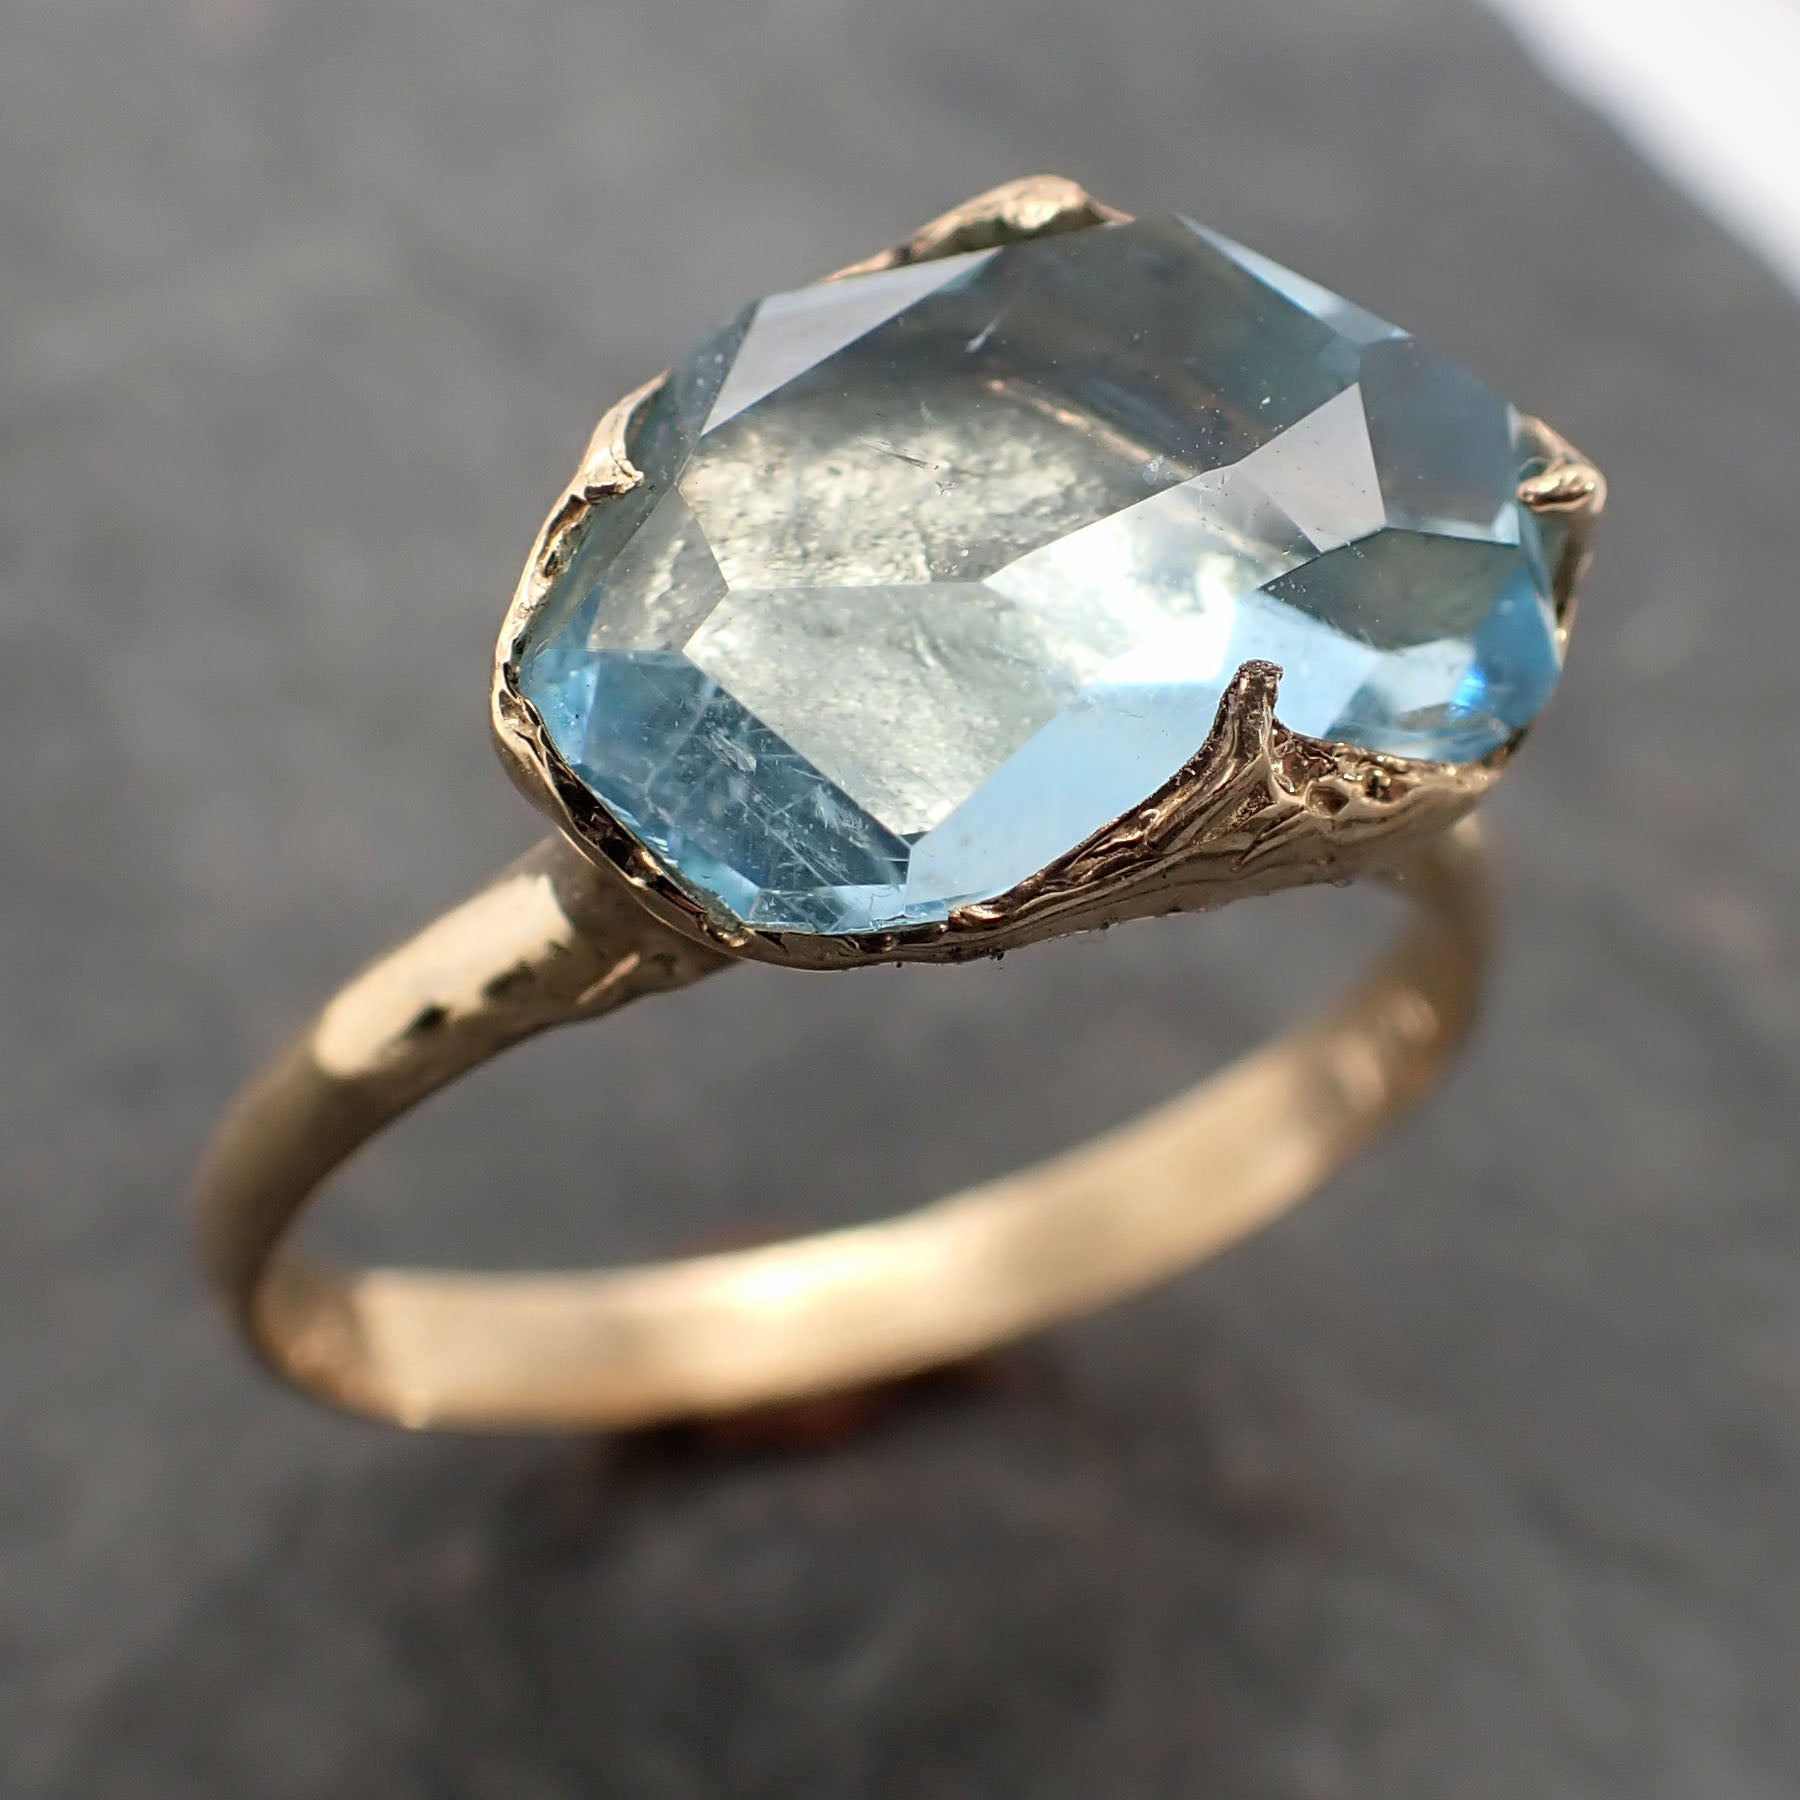 Partially faceted Aquamarine Solitaire Ring 18k gold Custom One Of a Kind Gemstone Ring Bespoke byAngeline 2380